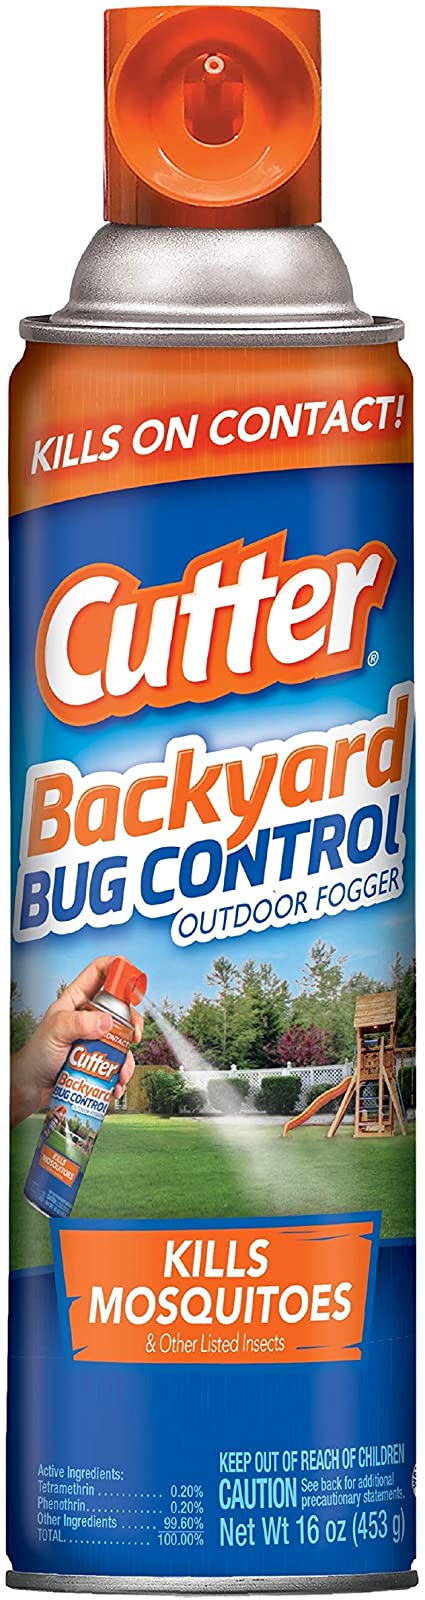 Cutter Backyard Bug Control Outdoor Fogger (HG-65704), Pack of 6